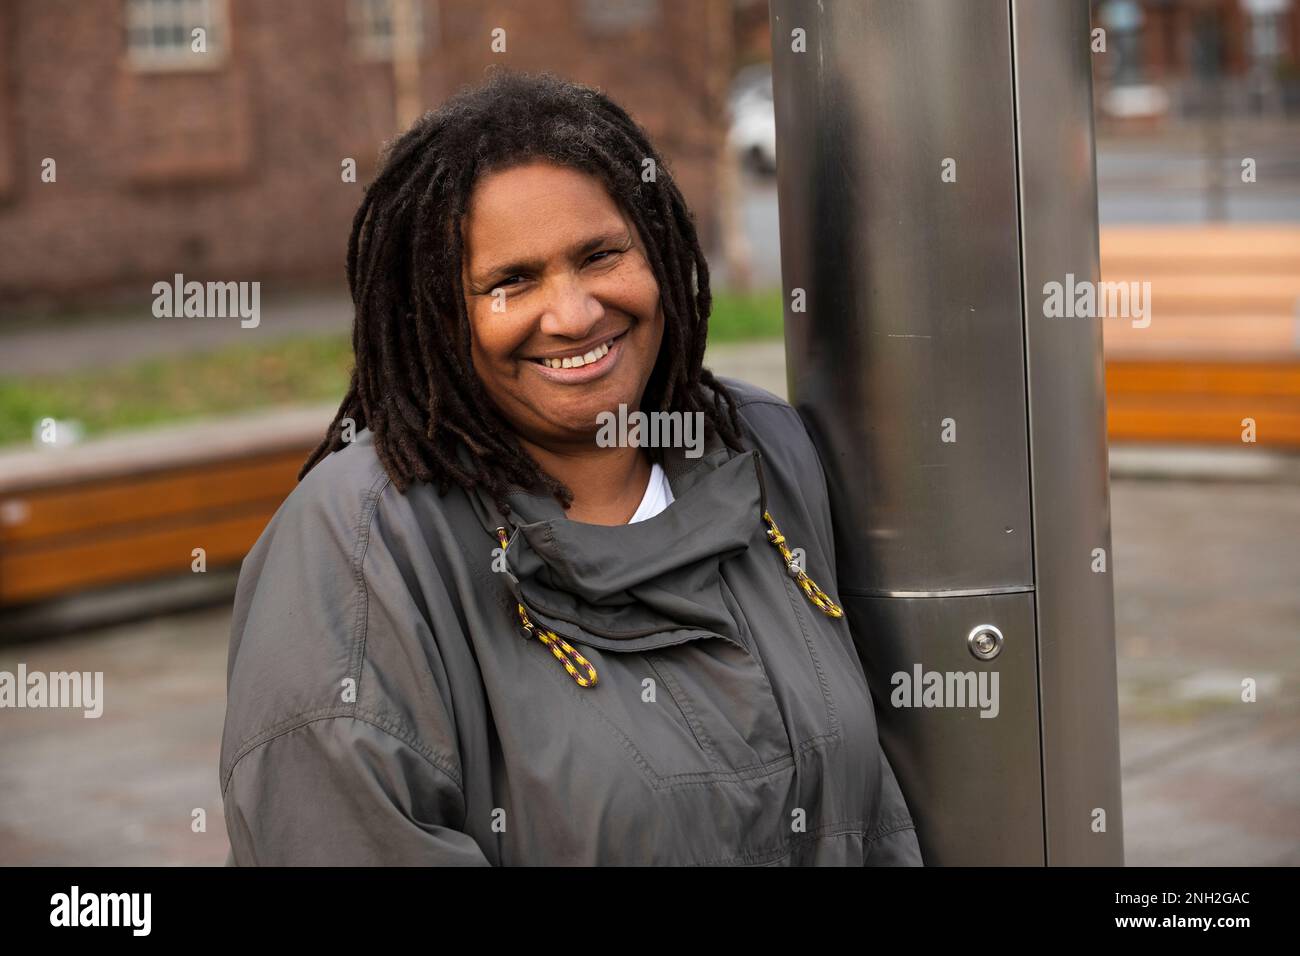 Portrait of a woman, smiling. Manchester. United Kingdom. Stock Photo